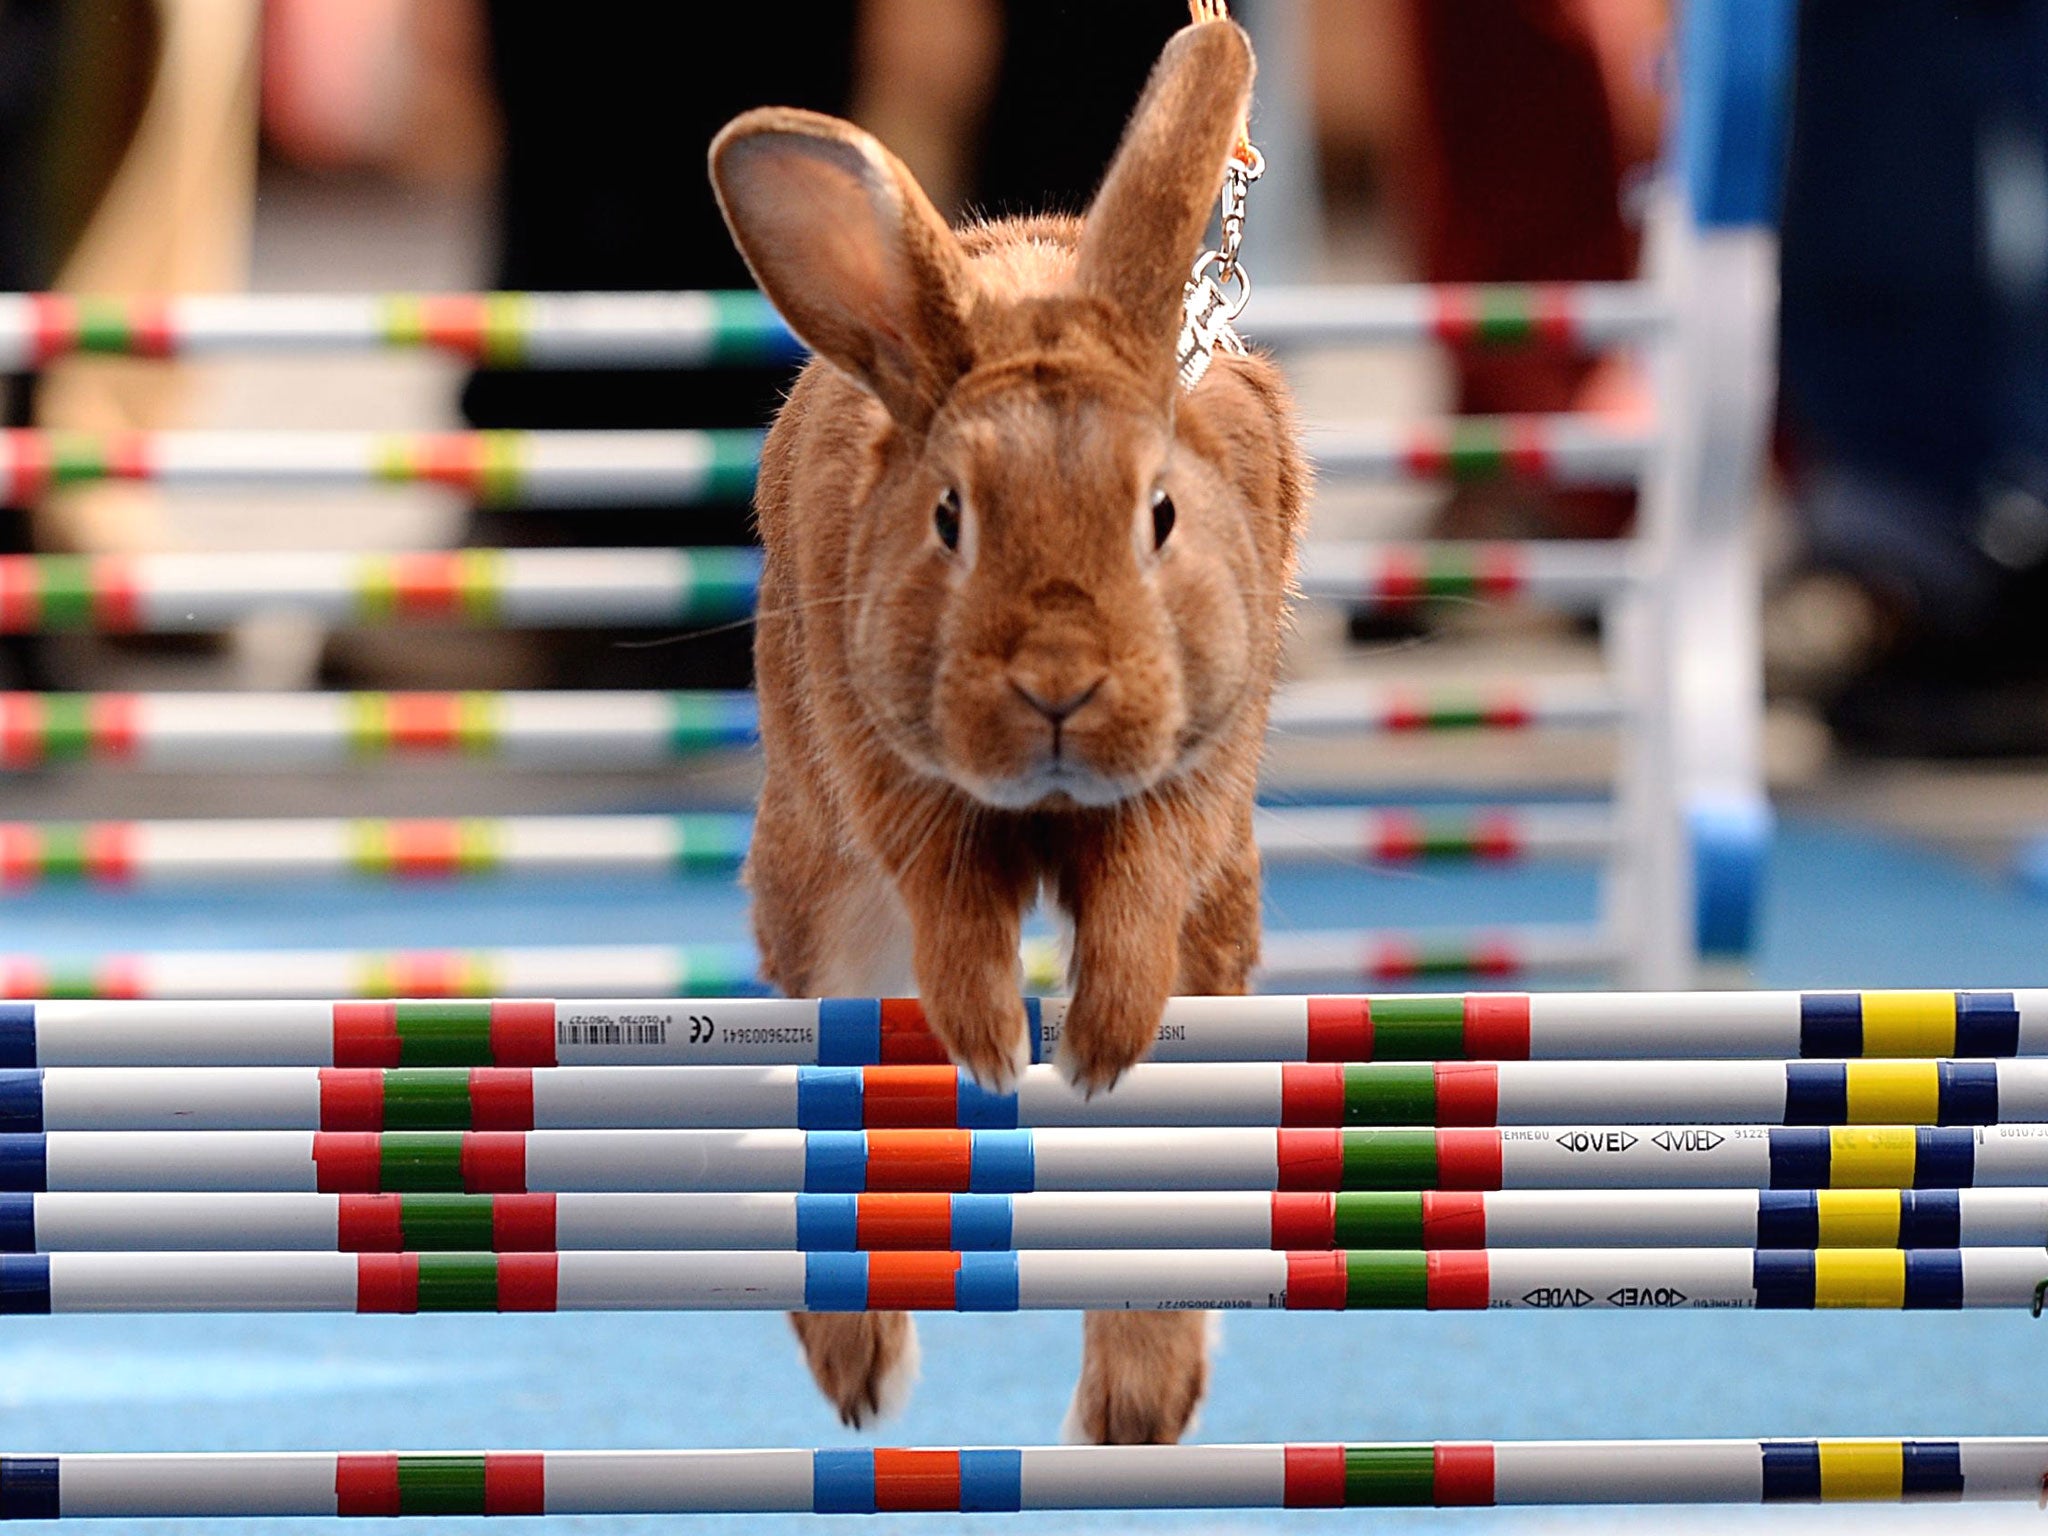 Inspired by equestrian jumping events, rabbit enthusiasts in the Czech Republic organized a bunny hop competition as an early Easter celebration